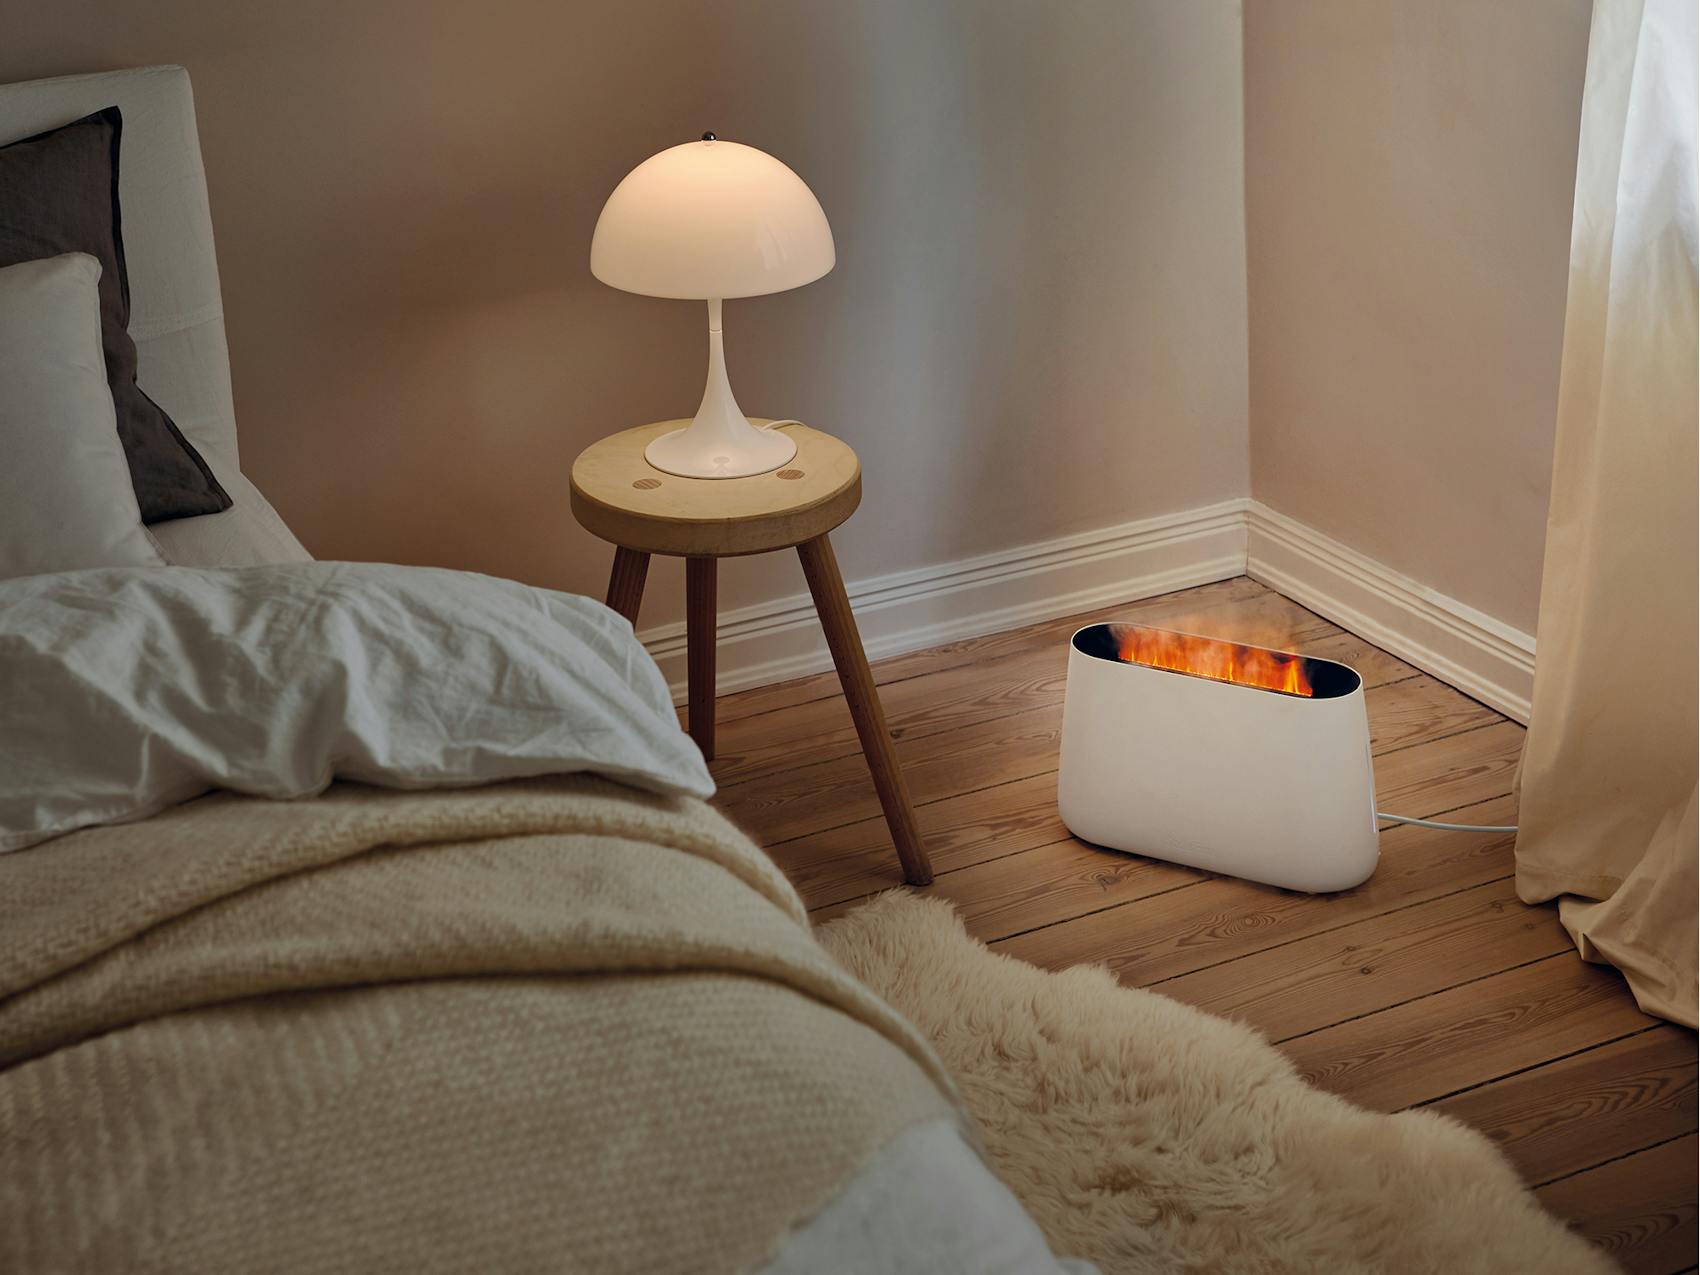 Ben humidifier by Stadler Form in white in a bedroom